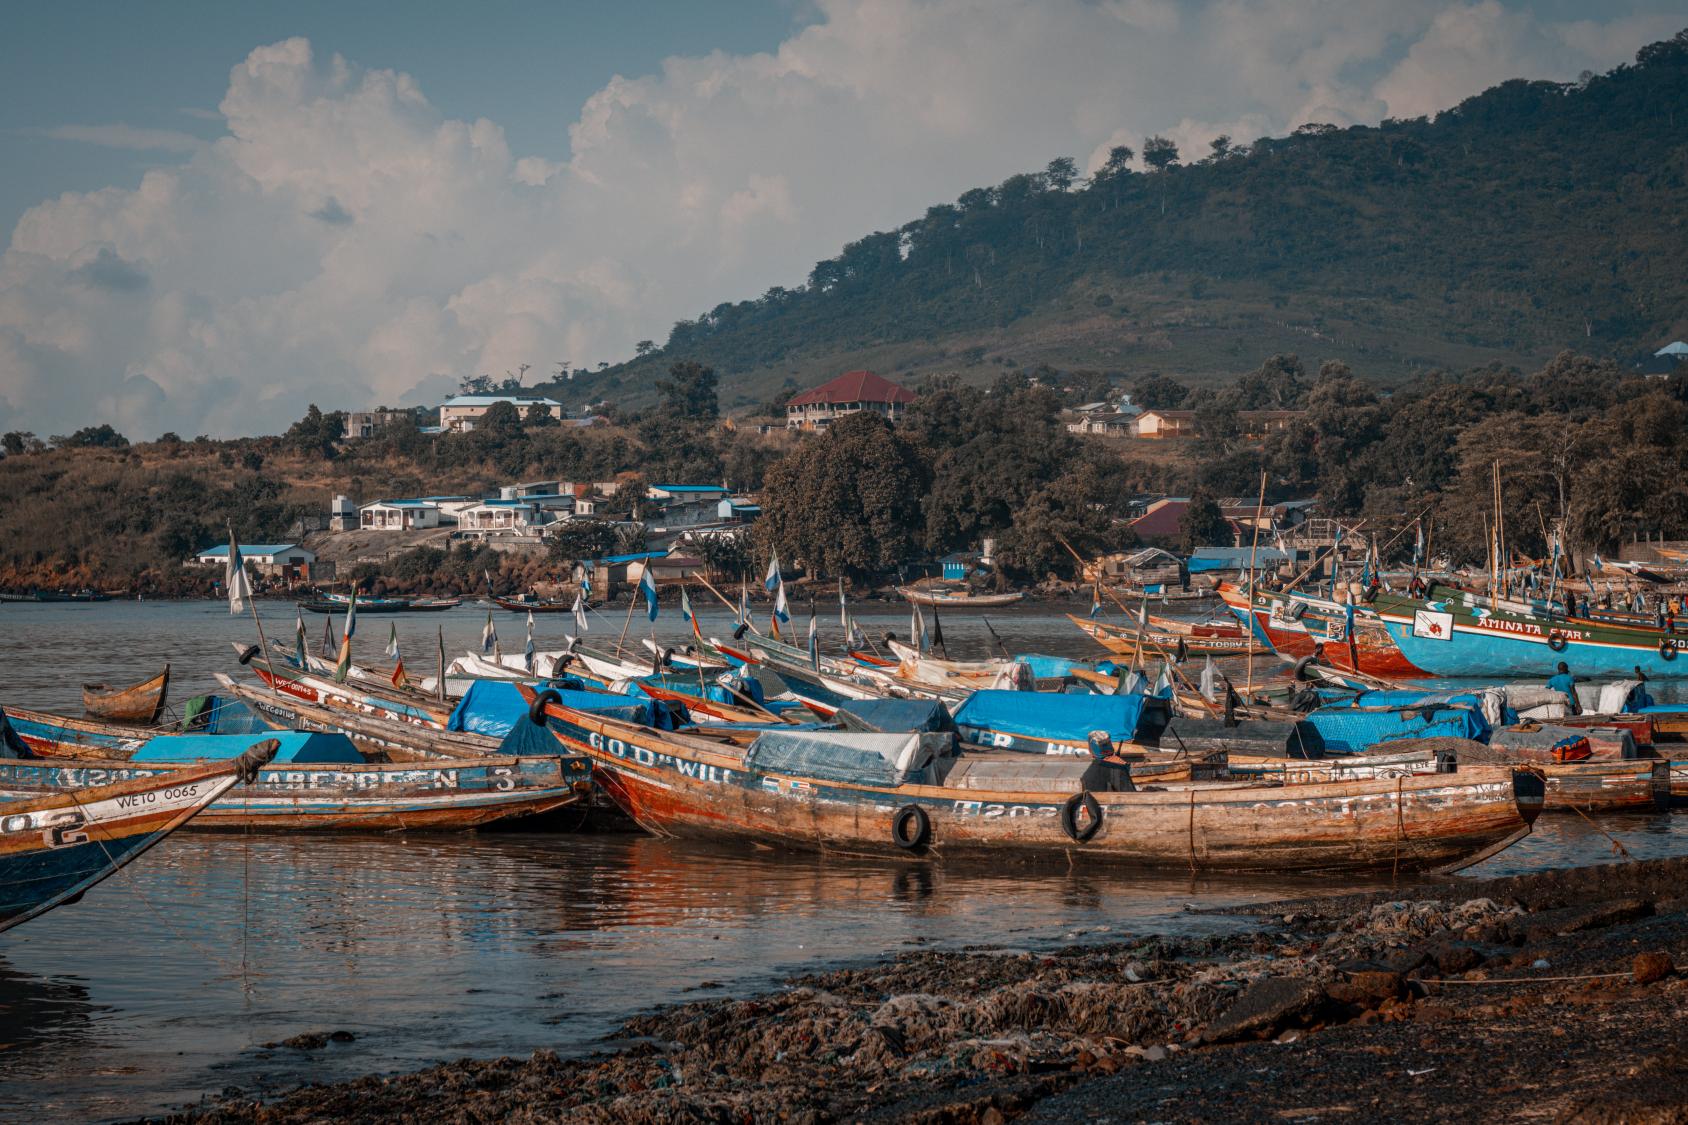 The effect of deforestation on the hills  of Tombo, a coastal fishing town outside of the capital of Freetown in Sierra Leone.